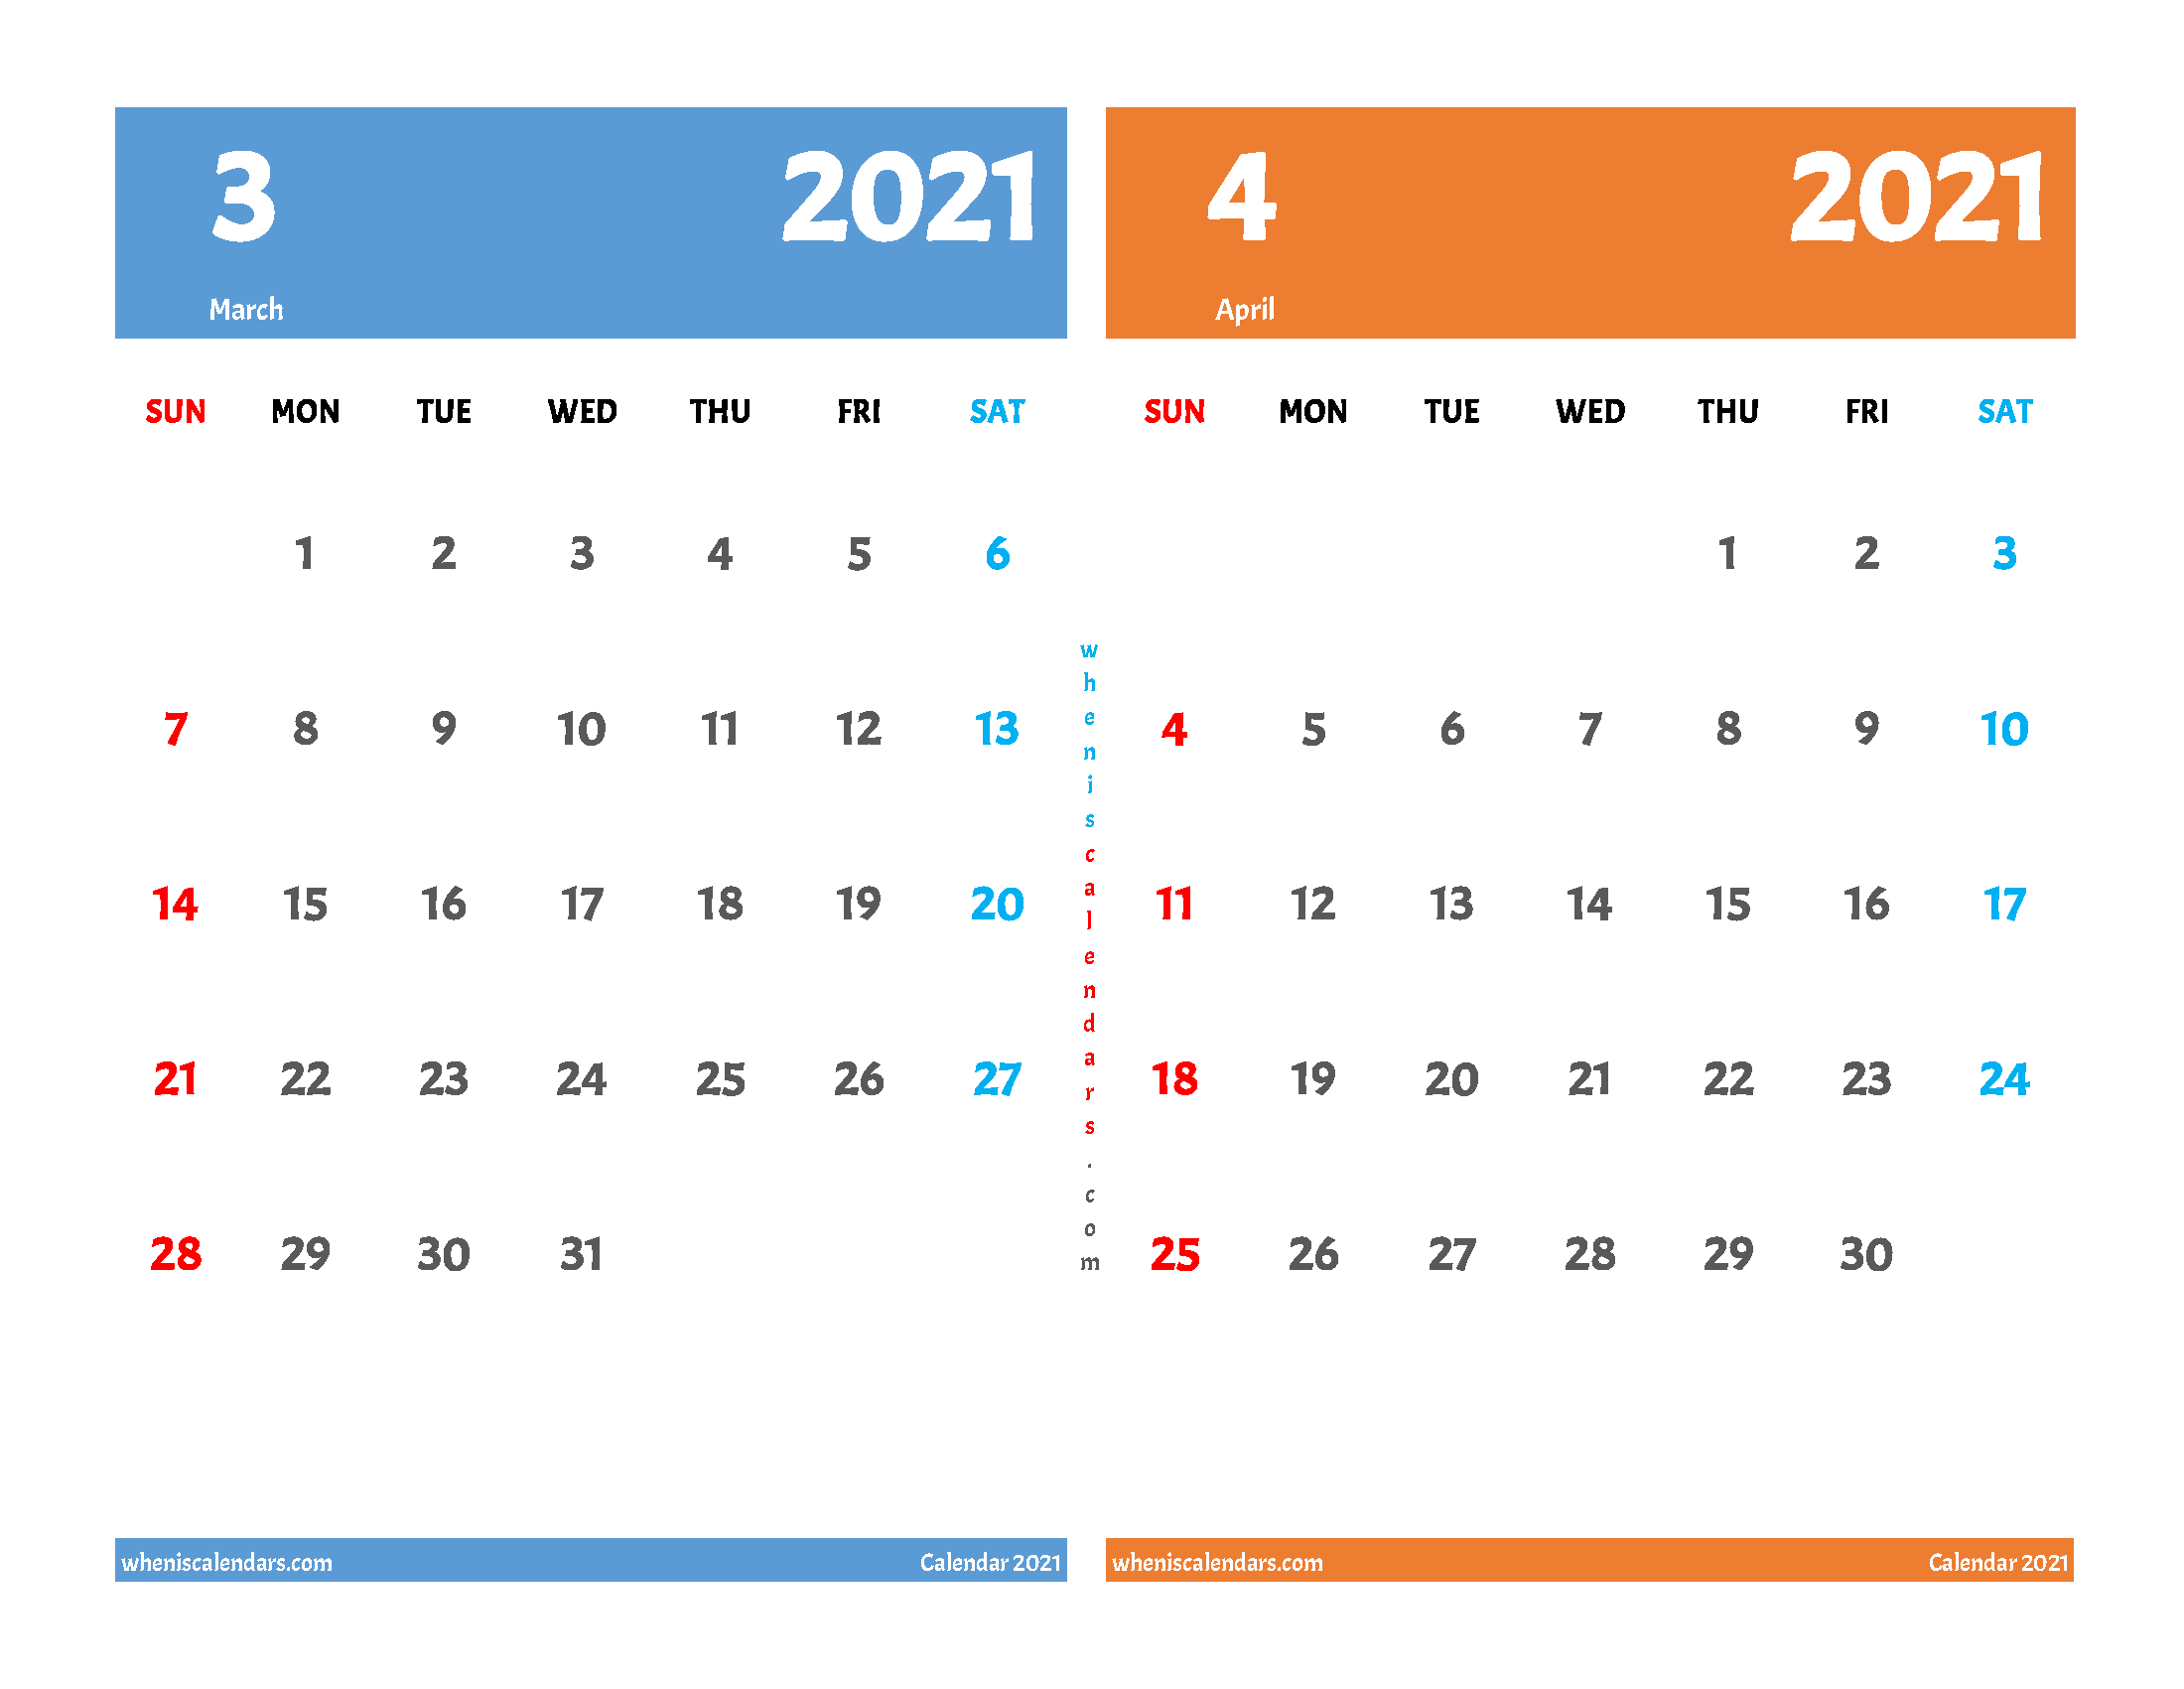 Calendar for March and April 2021